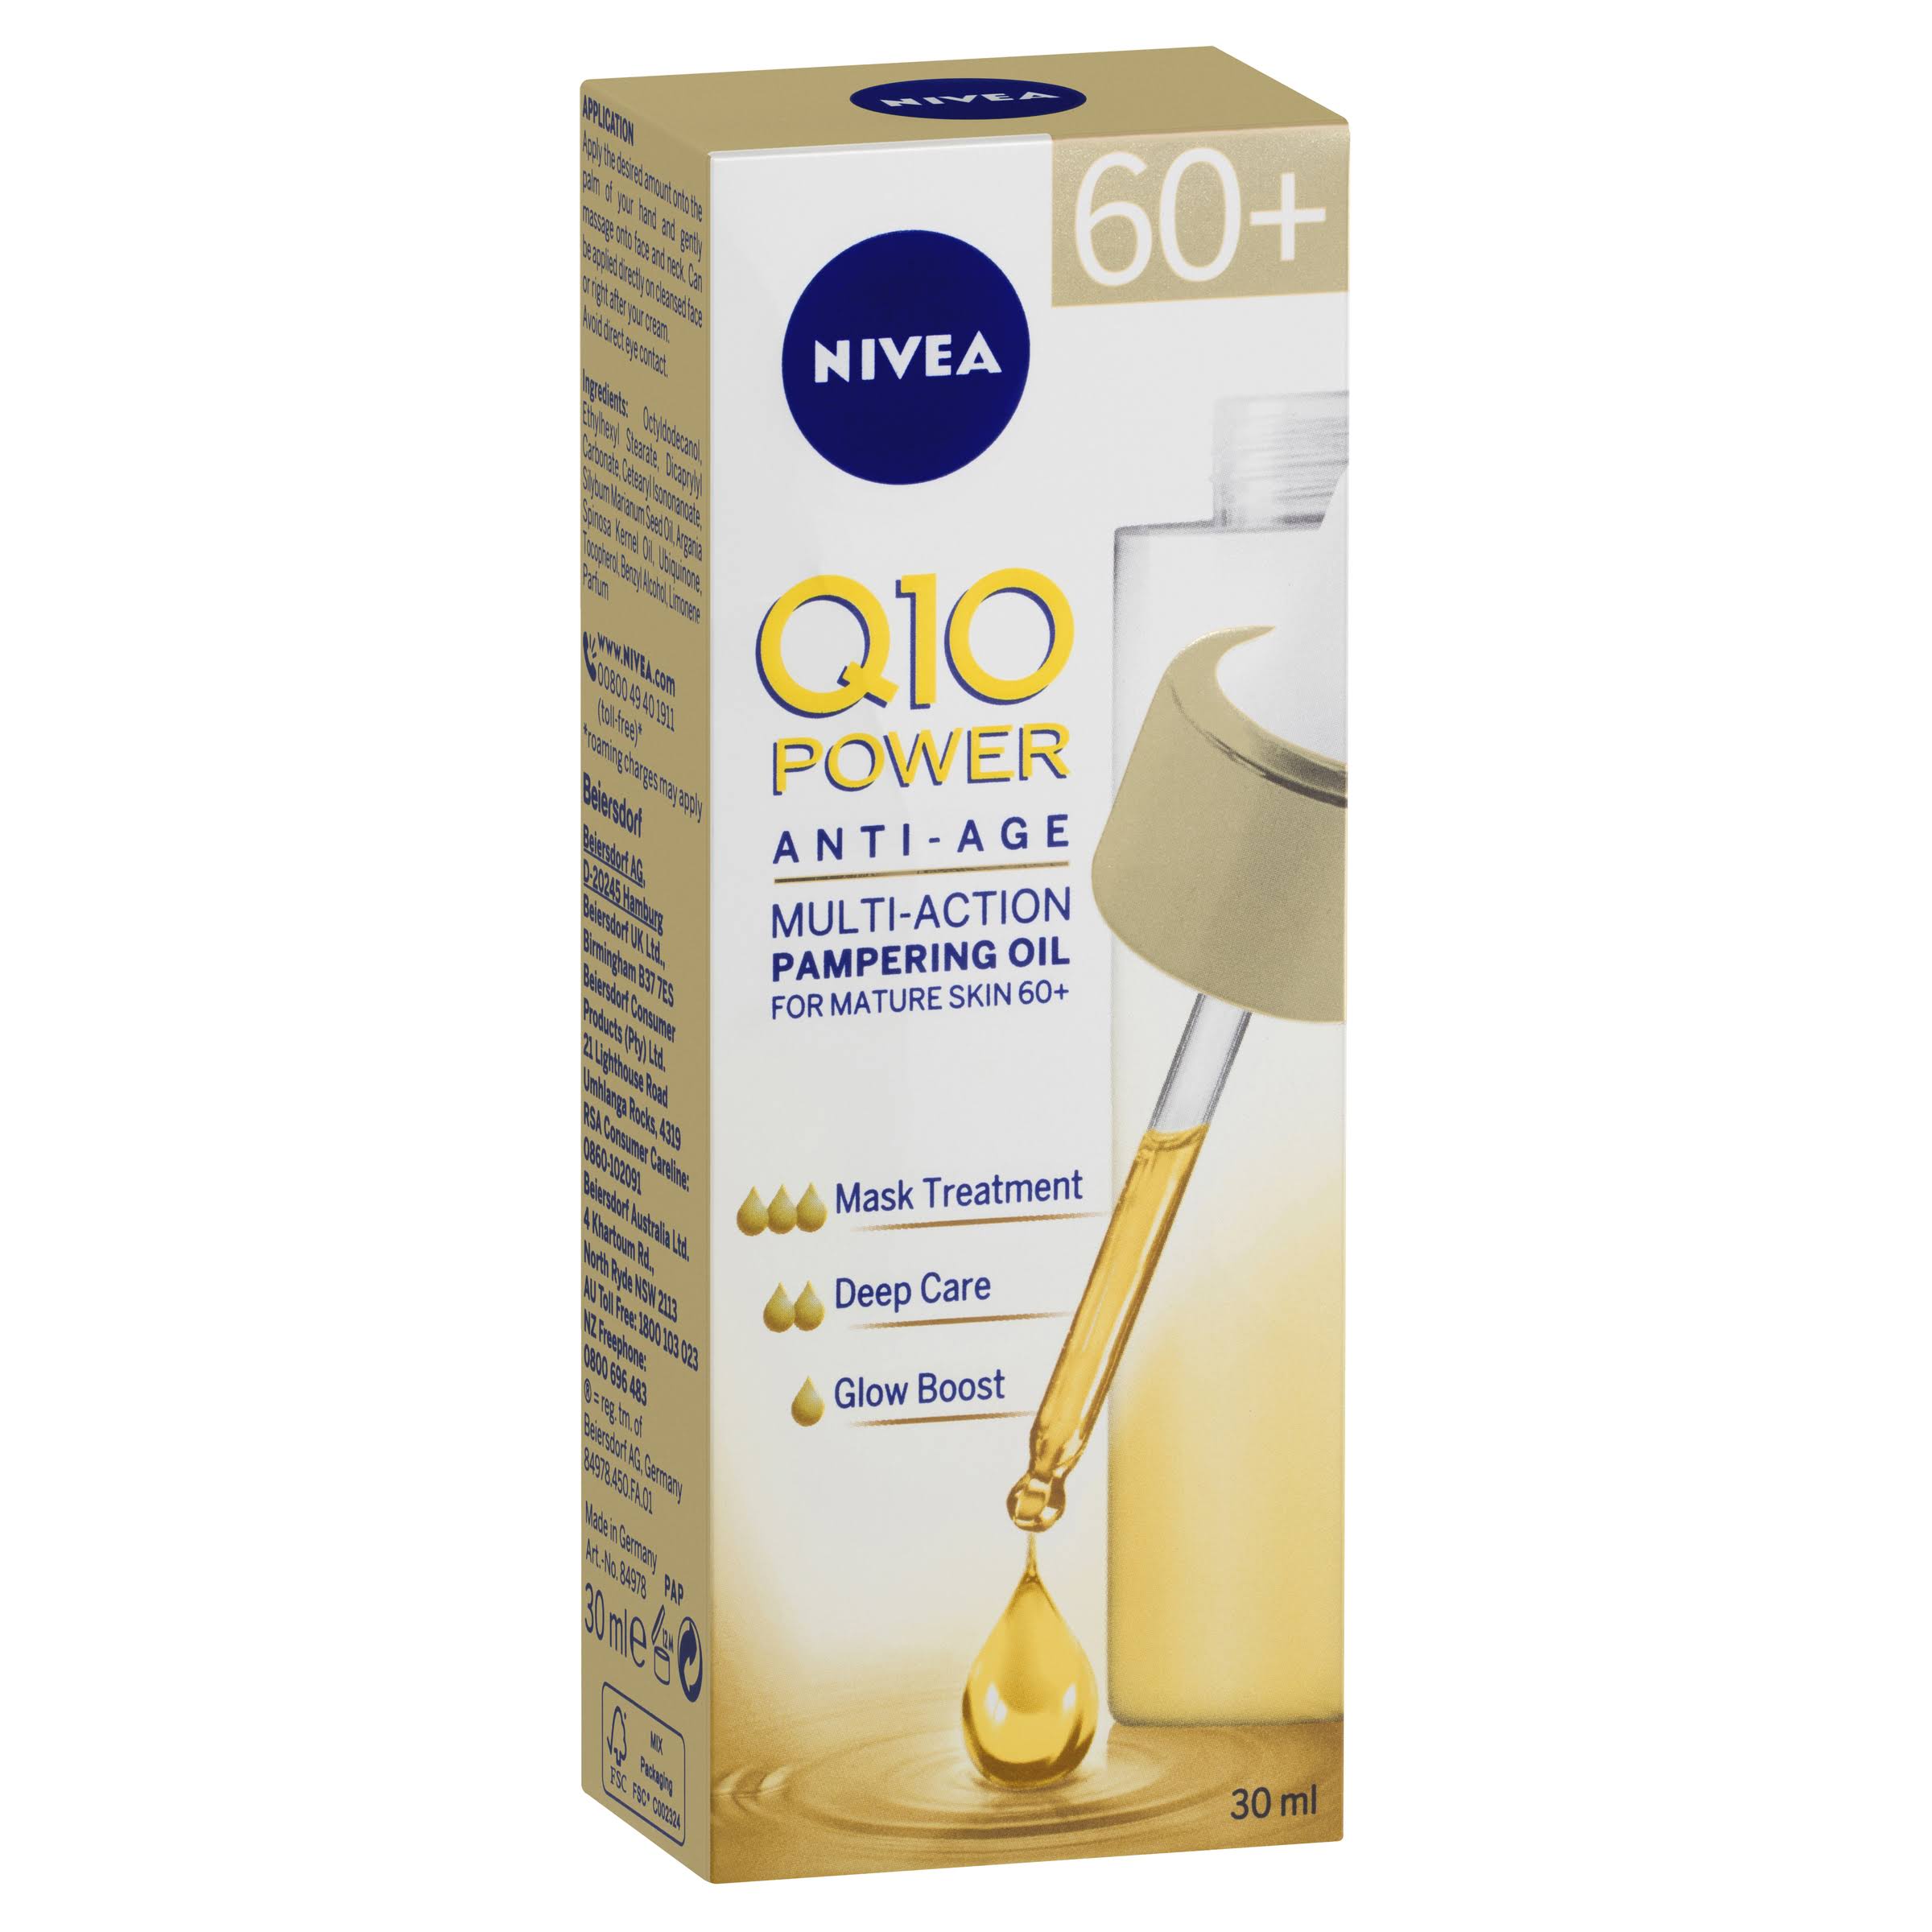 Nivea Q10 Power 60+ Anti-Aging Multi-Action Pampering Oil 30ml